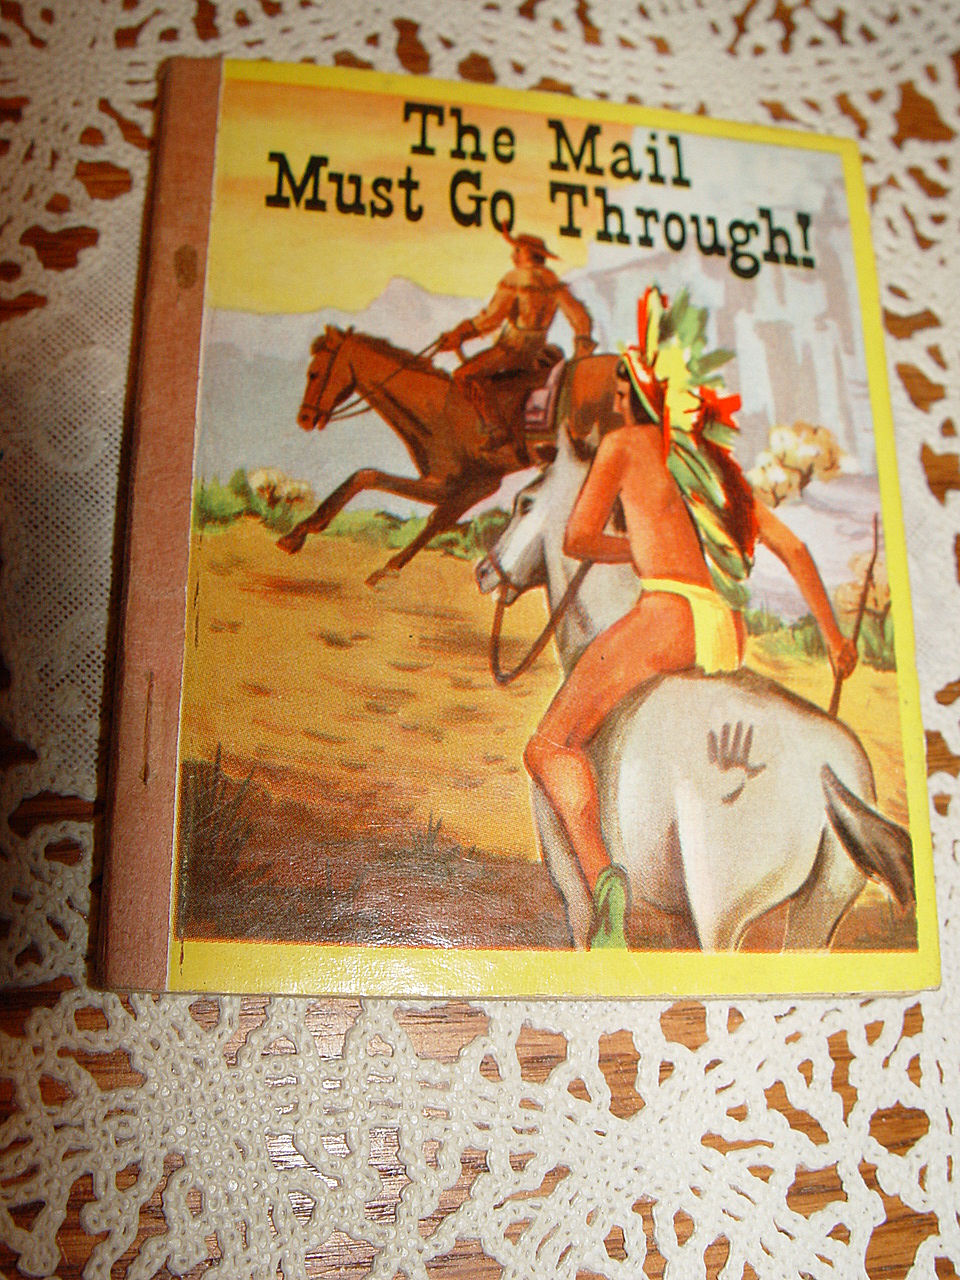 The Mail Must Go
                        Through by Alan James 1949 "Swap-It"
                        Books